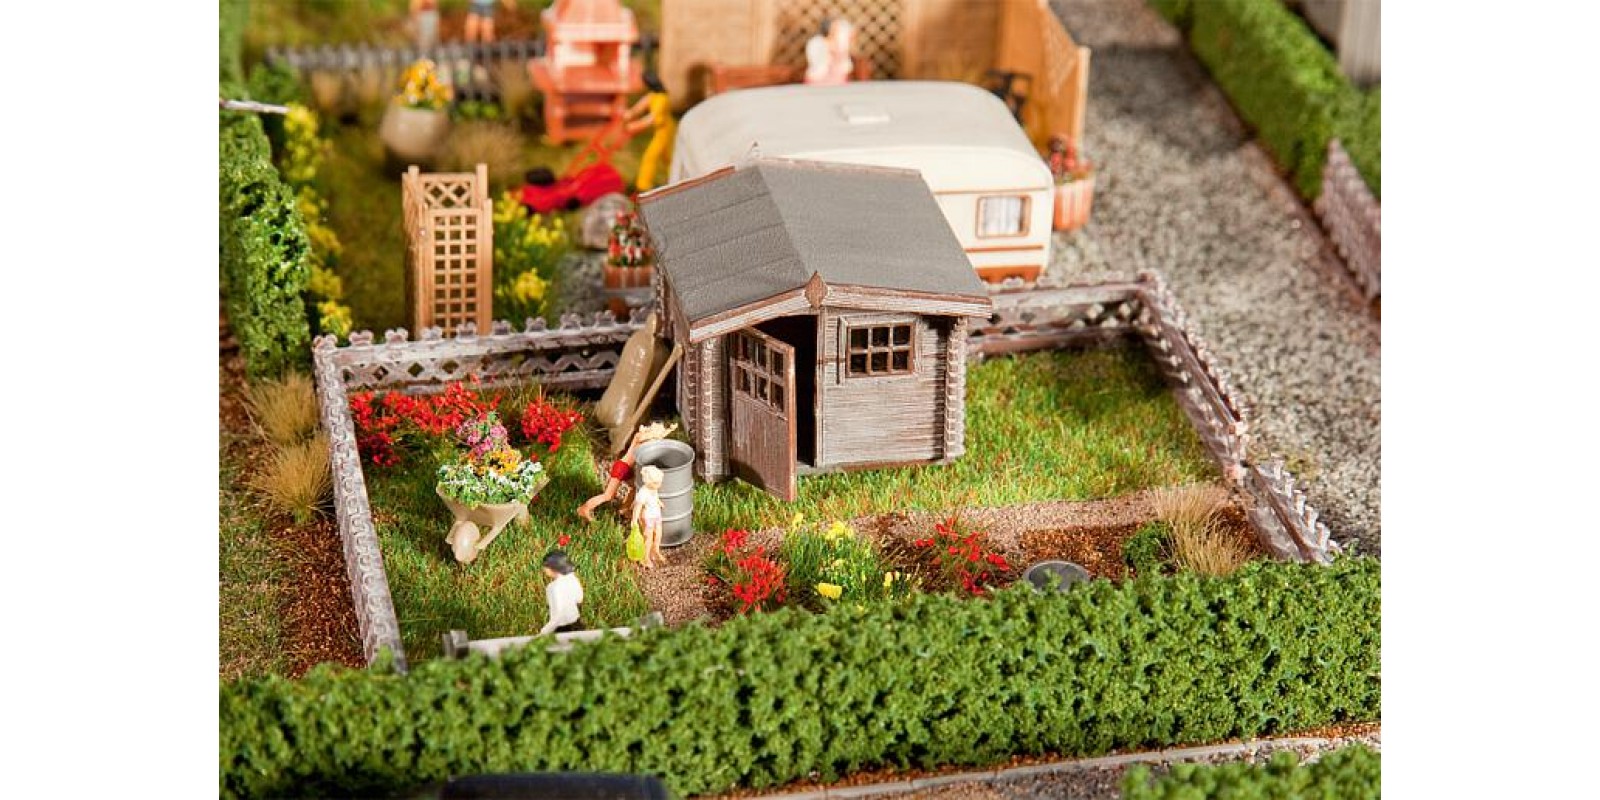 FA180492 Allotments with small garden house